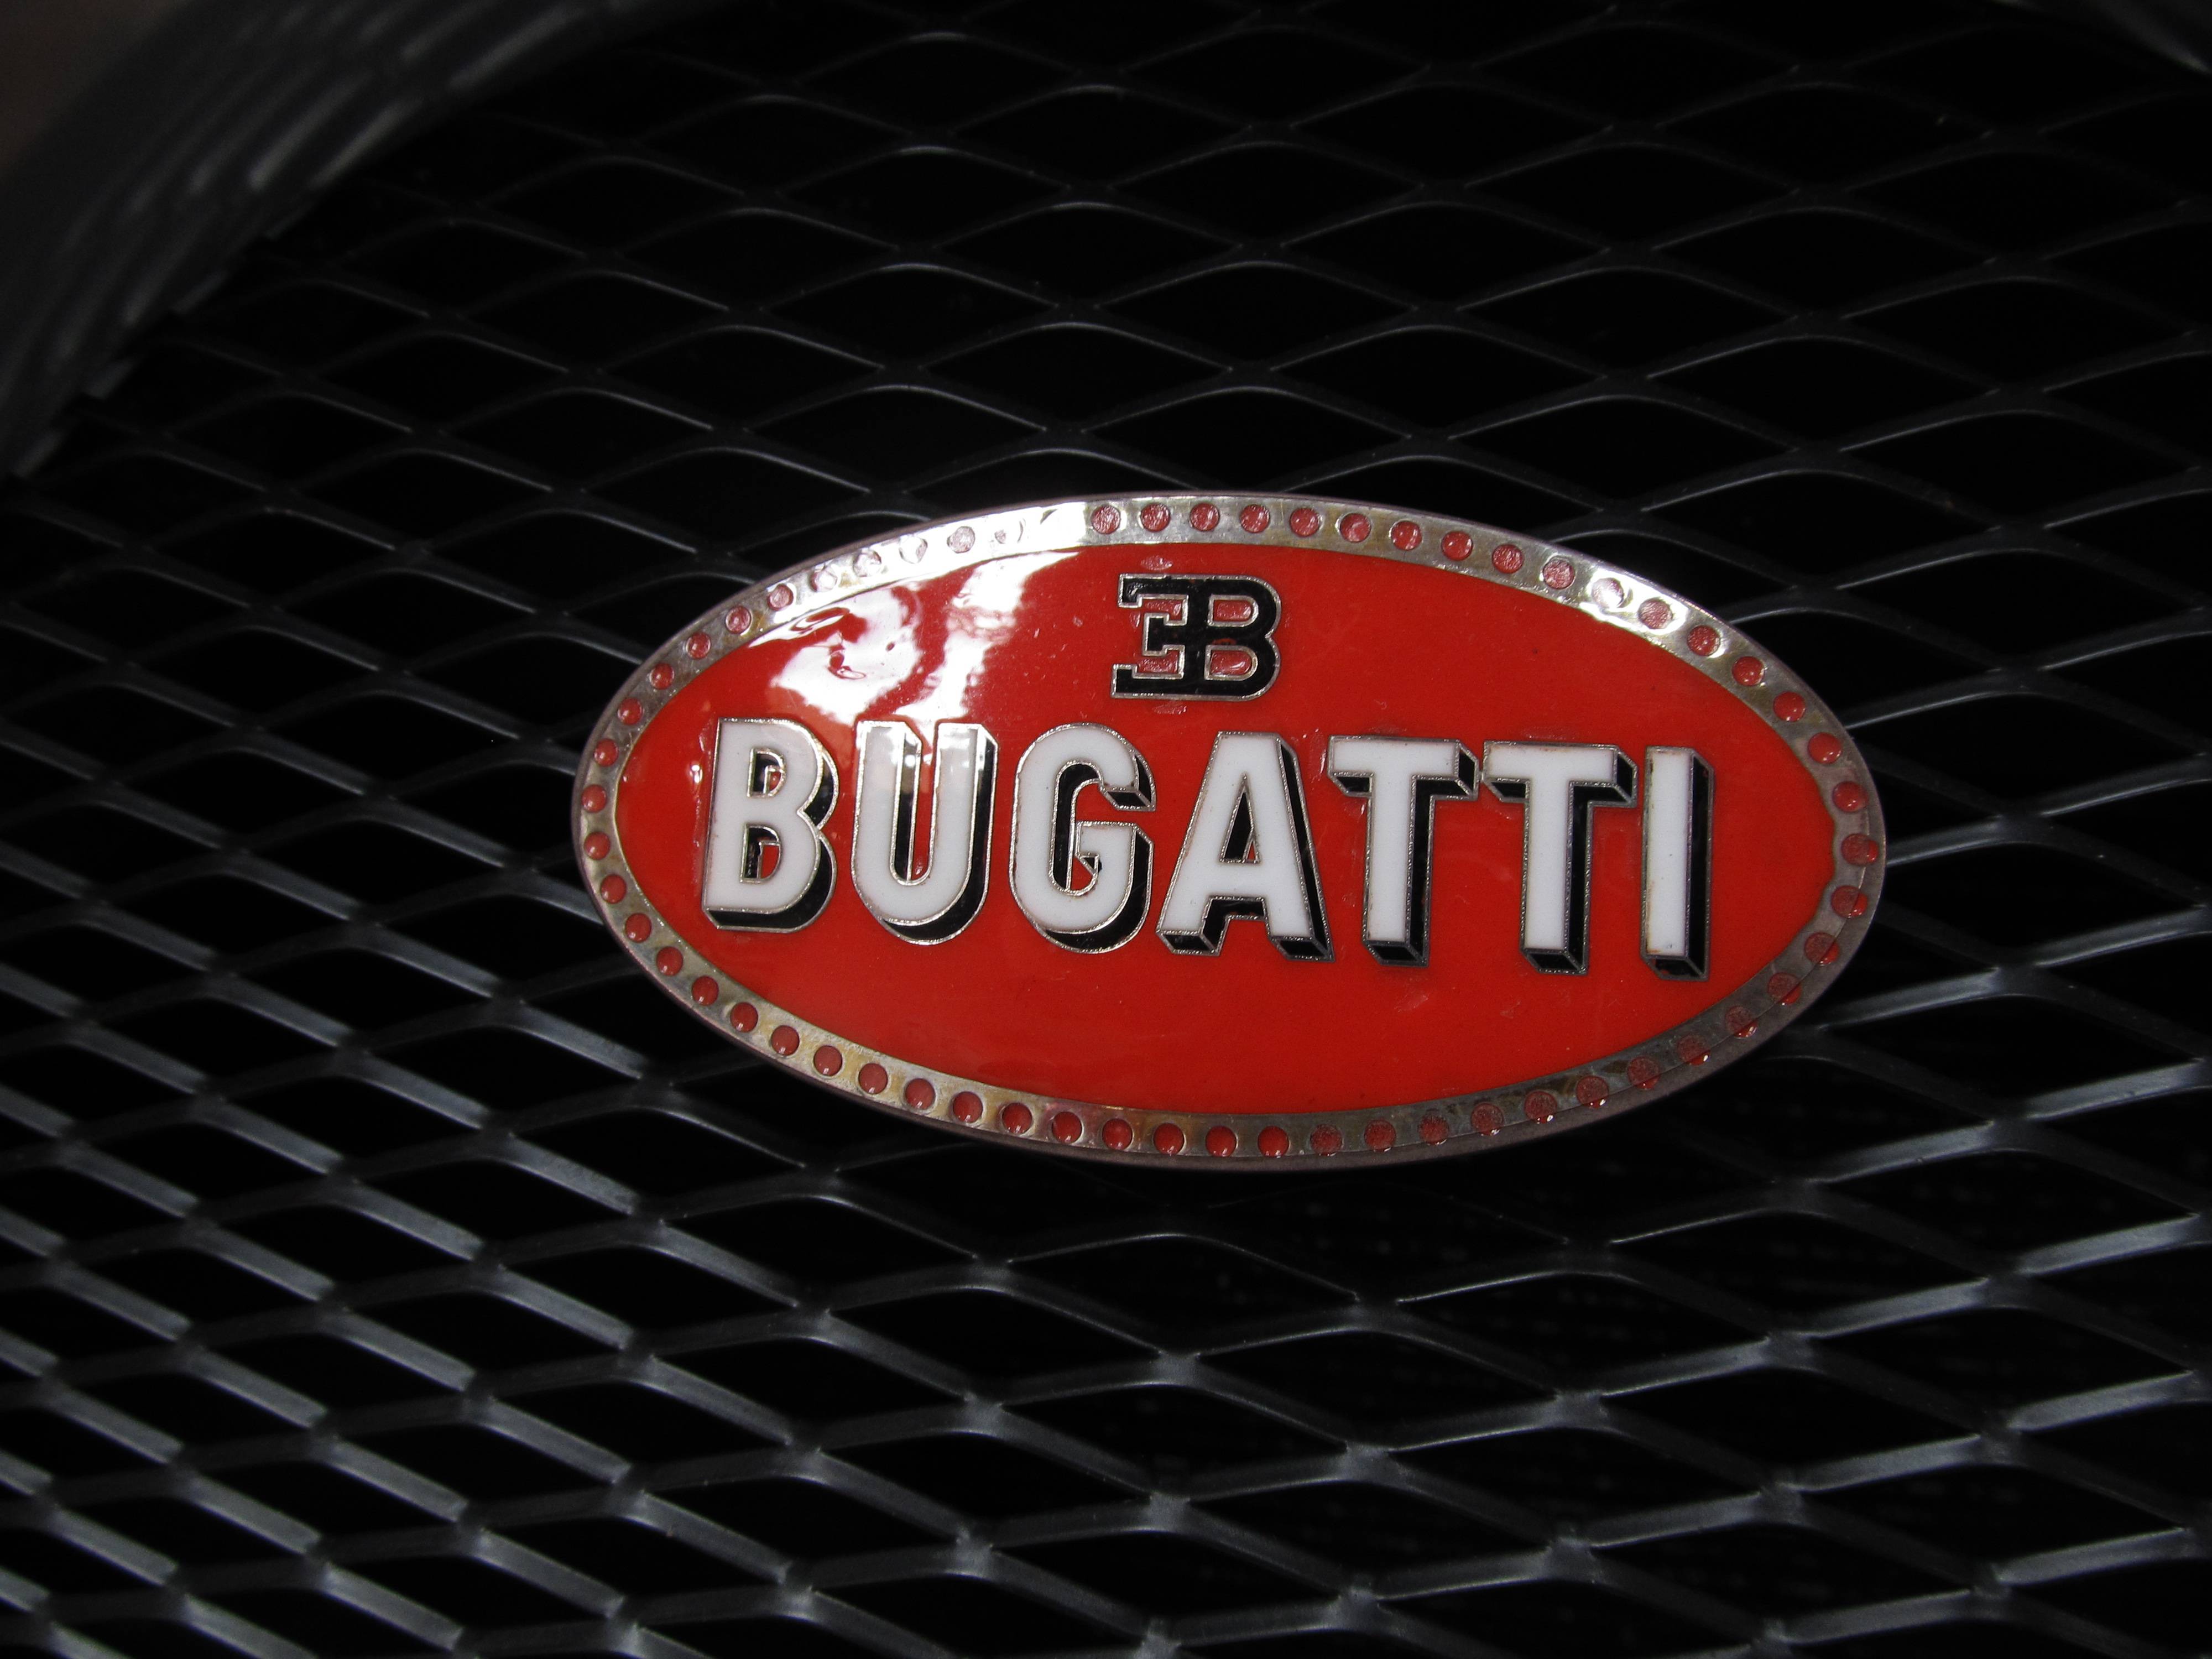 bugatti logo wallpapers – 4000×3000 High Definition Wallpapers